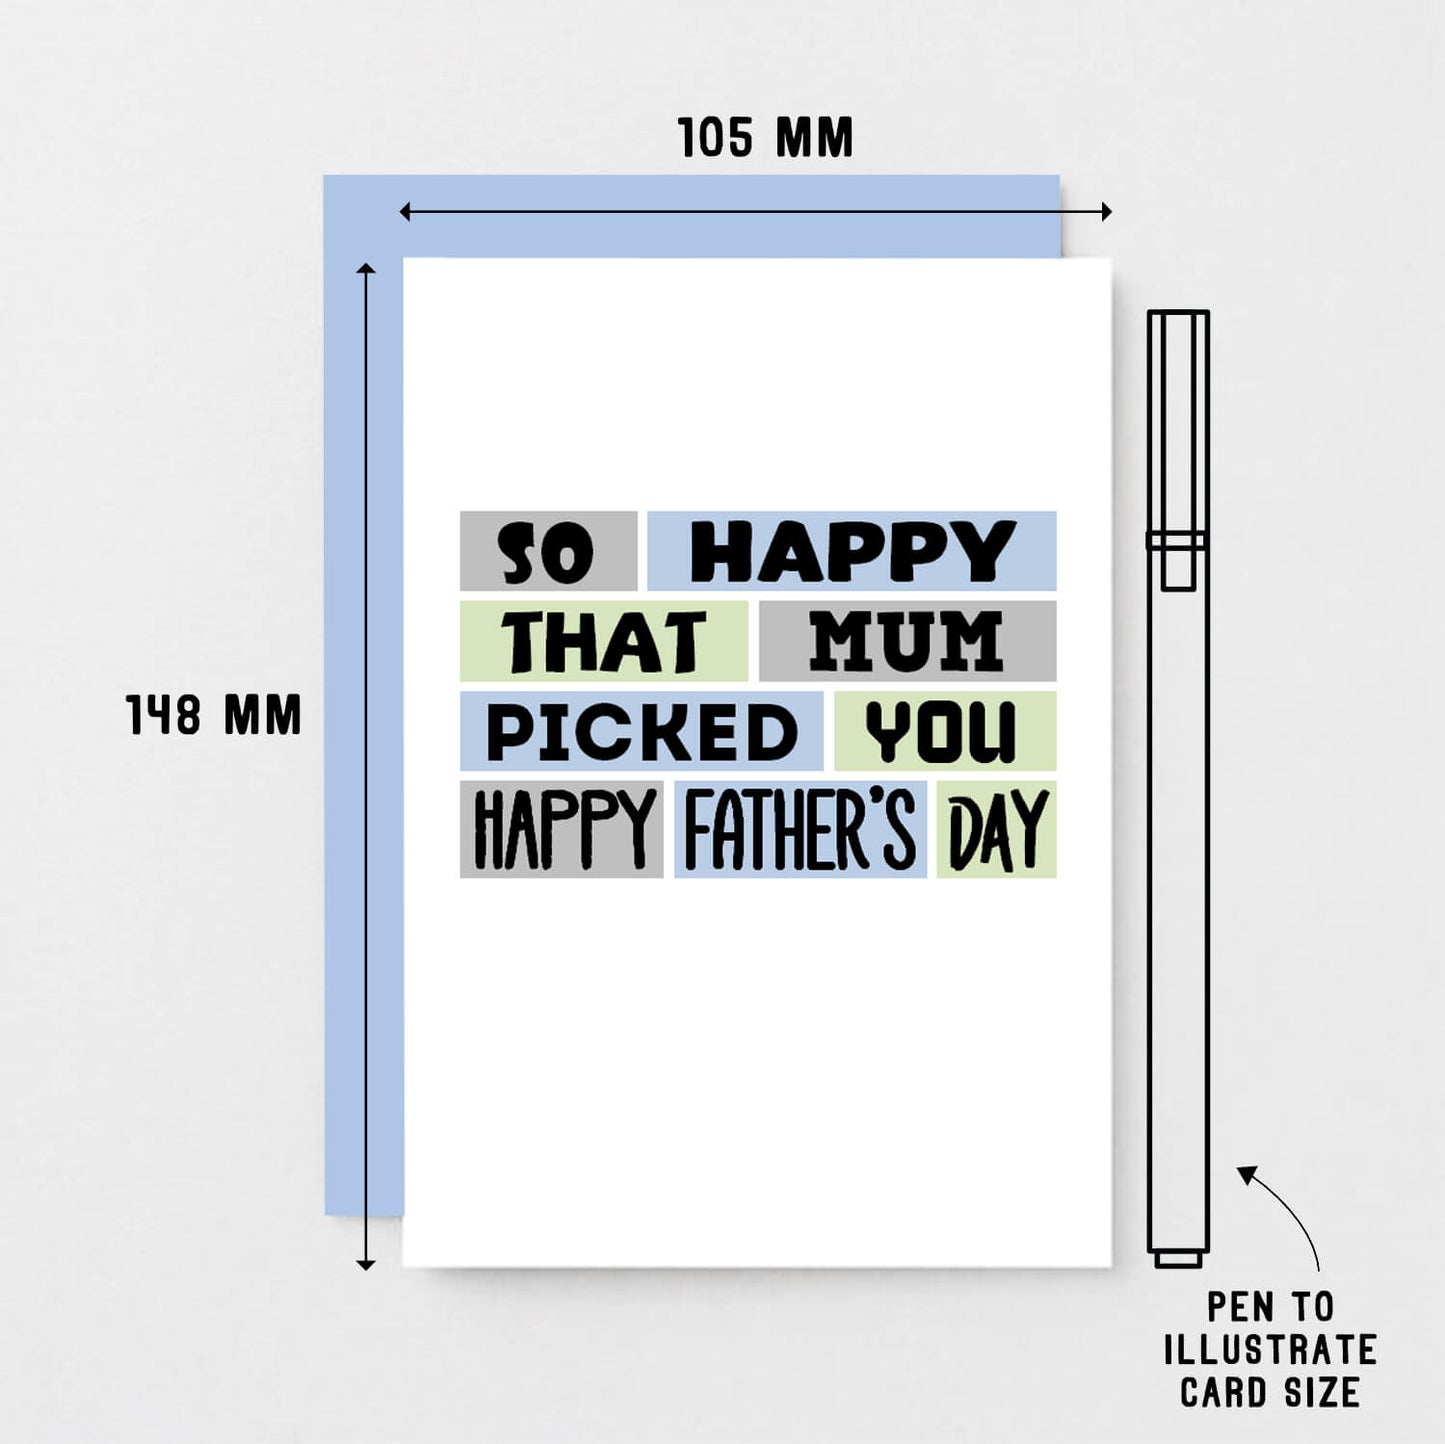 Father's Day Card by SixElevenCreations. Reads So happy that mum picked you. Happy Father's Day. Product Code SEF0010A6